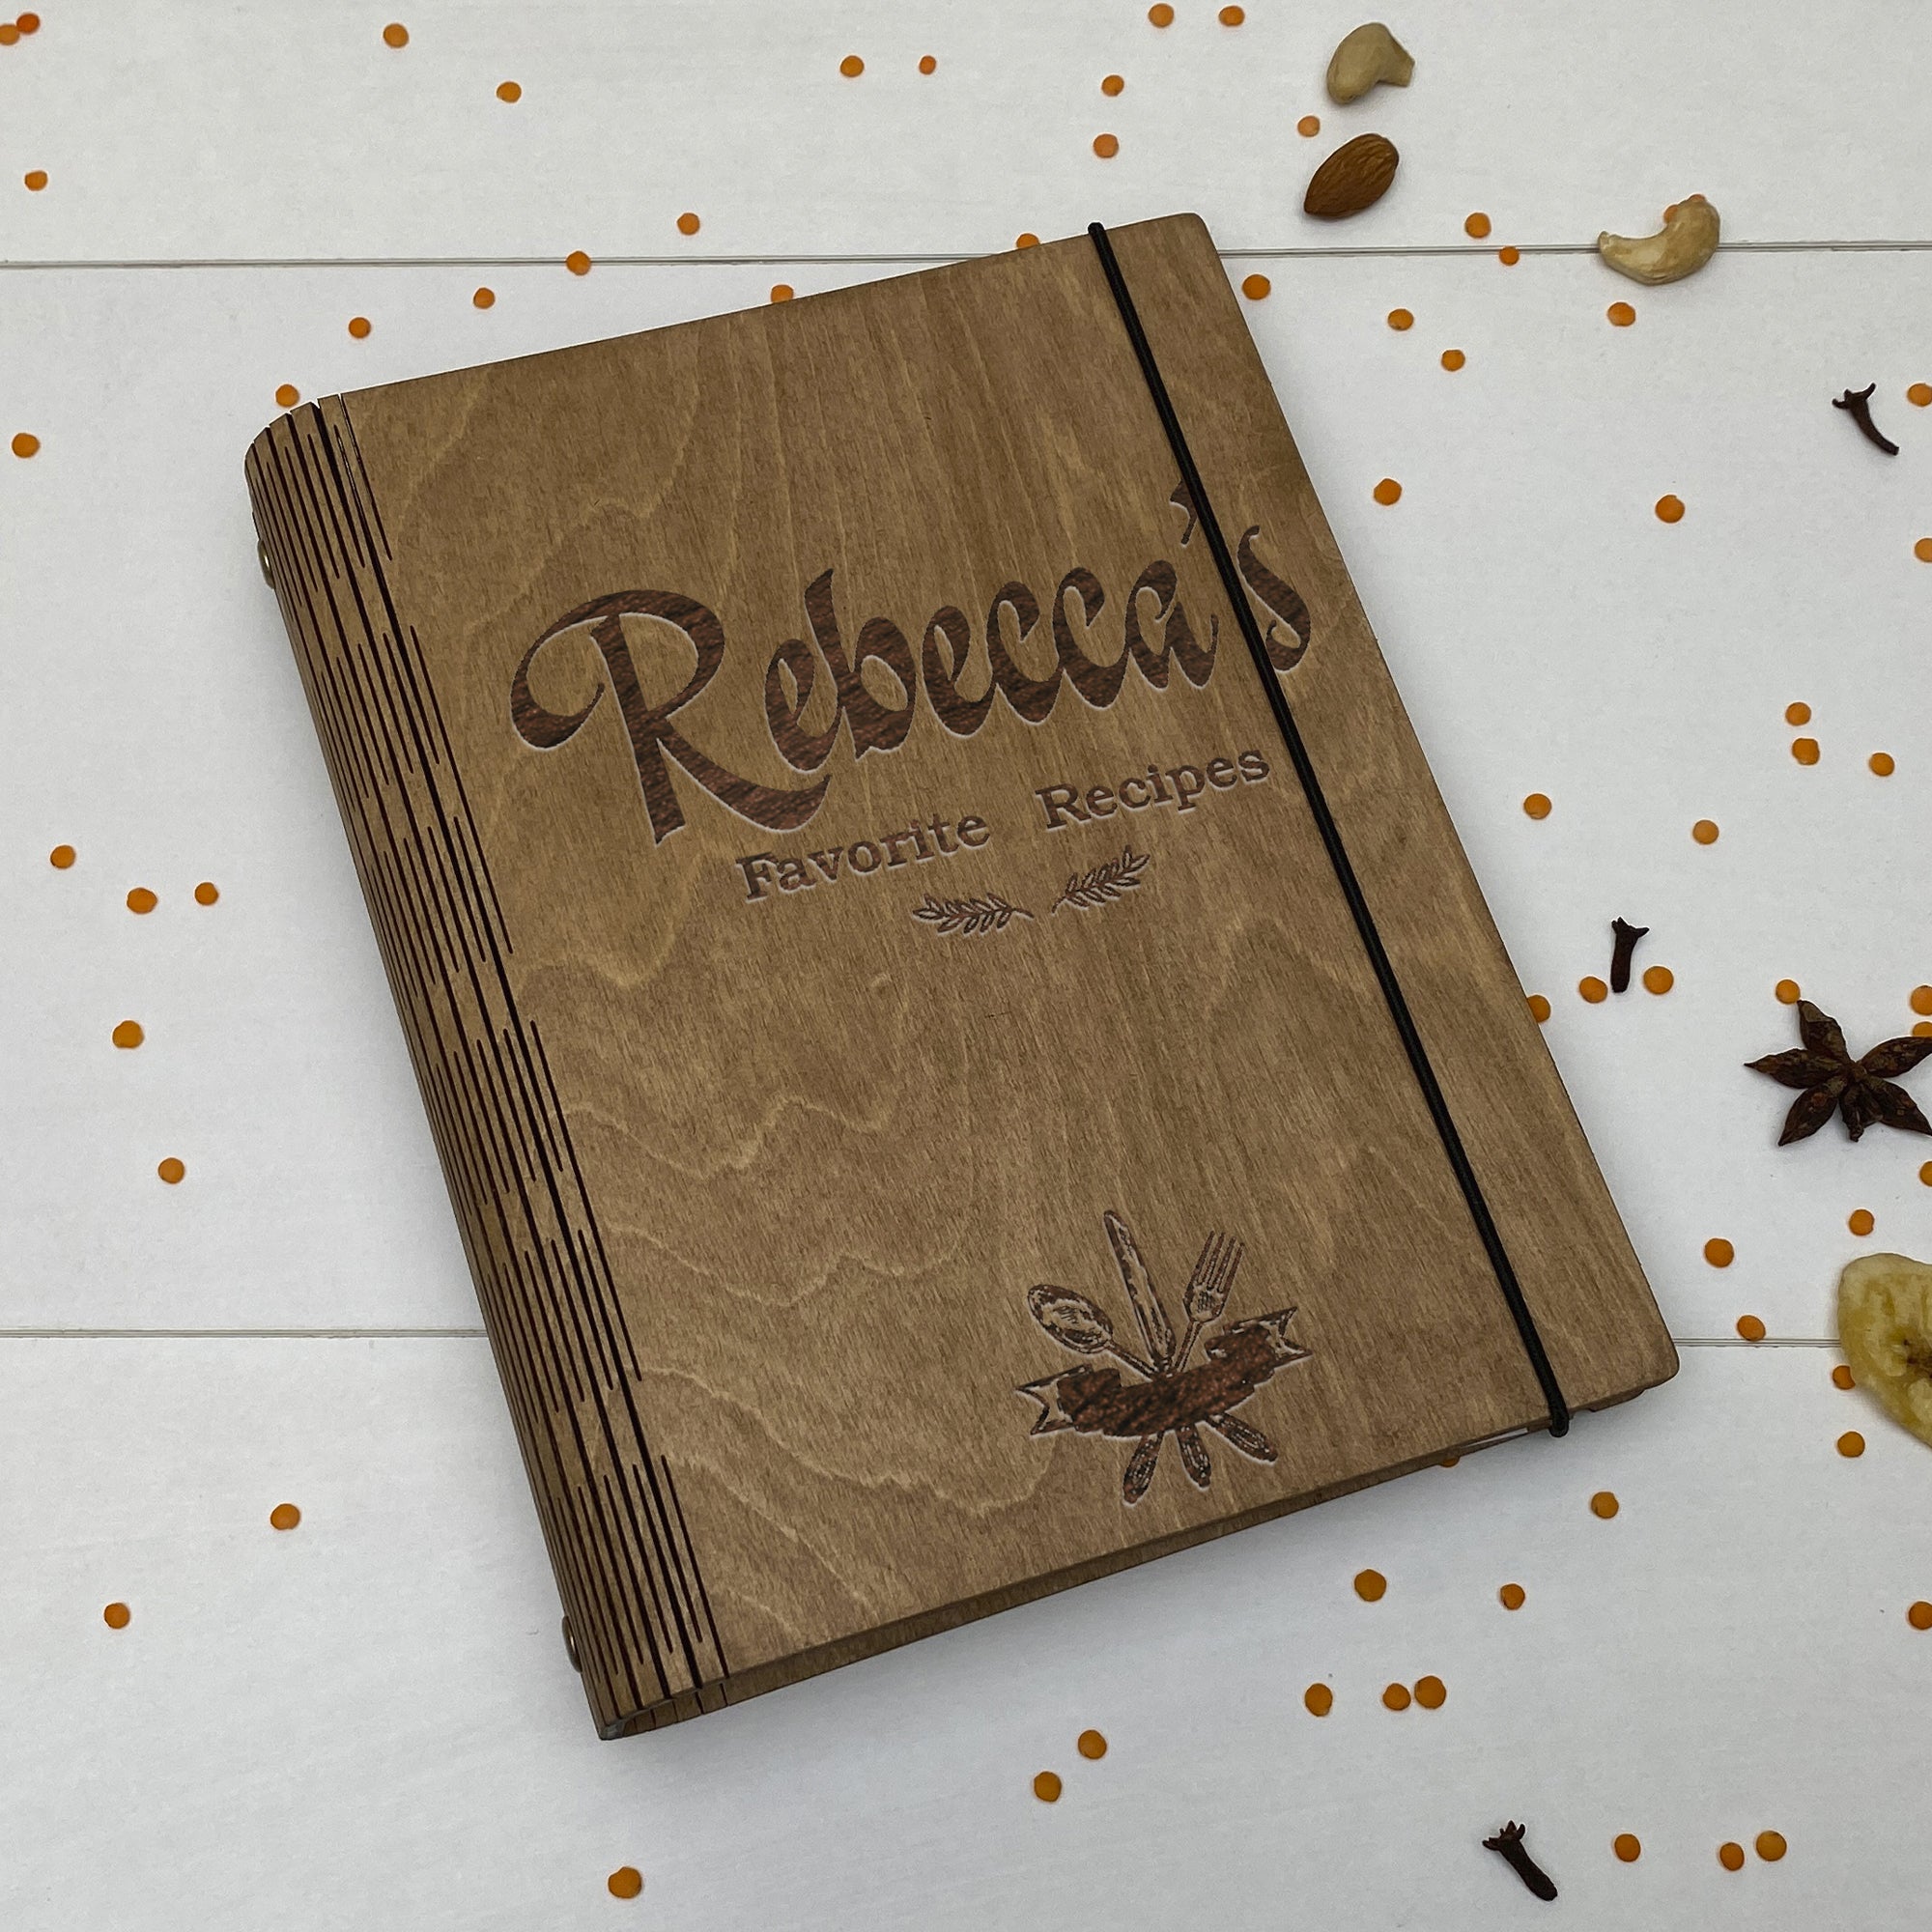 Personalized Favorite Recipes Book Free custom engraving